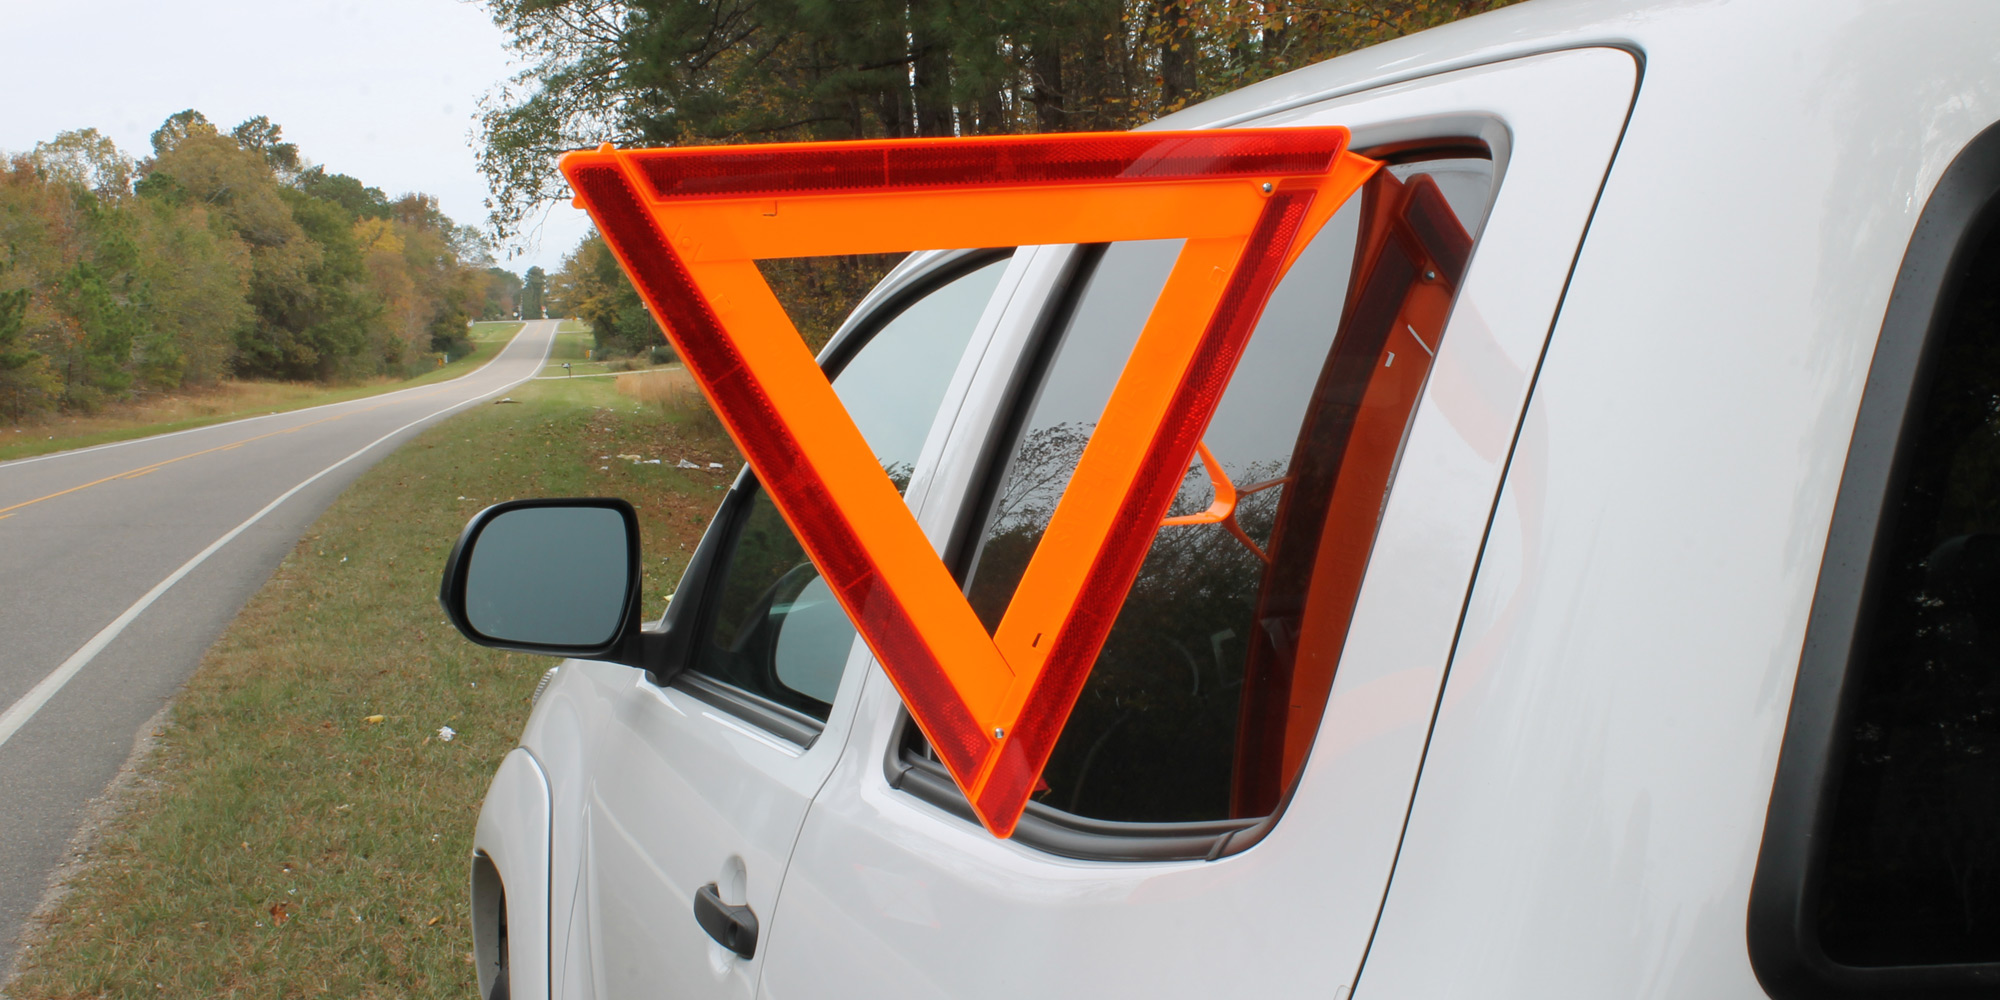 Fold-Up Window-Mount Caution Triangle from VSM